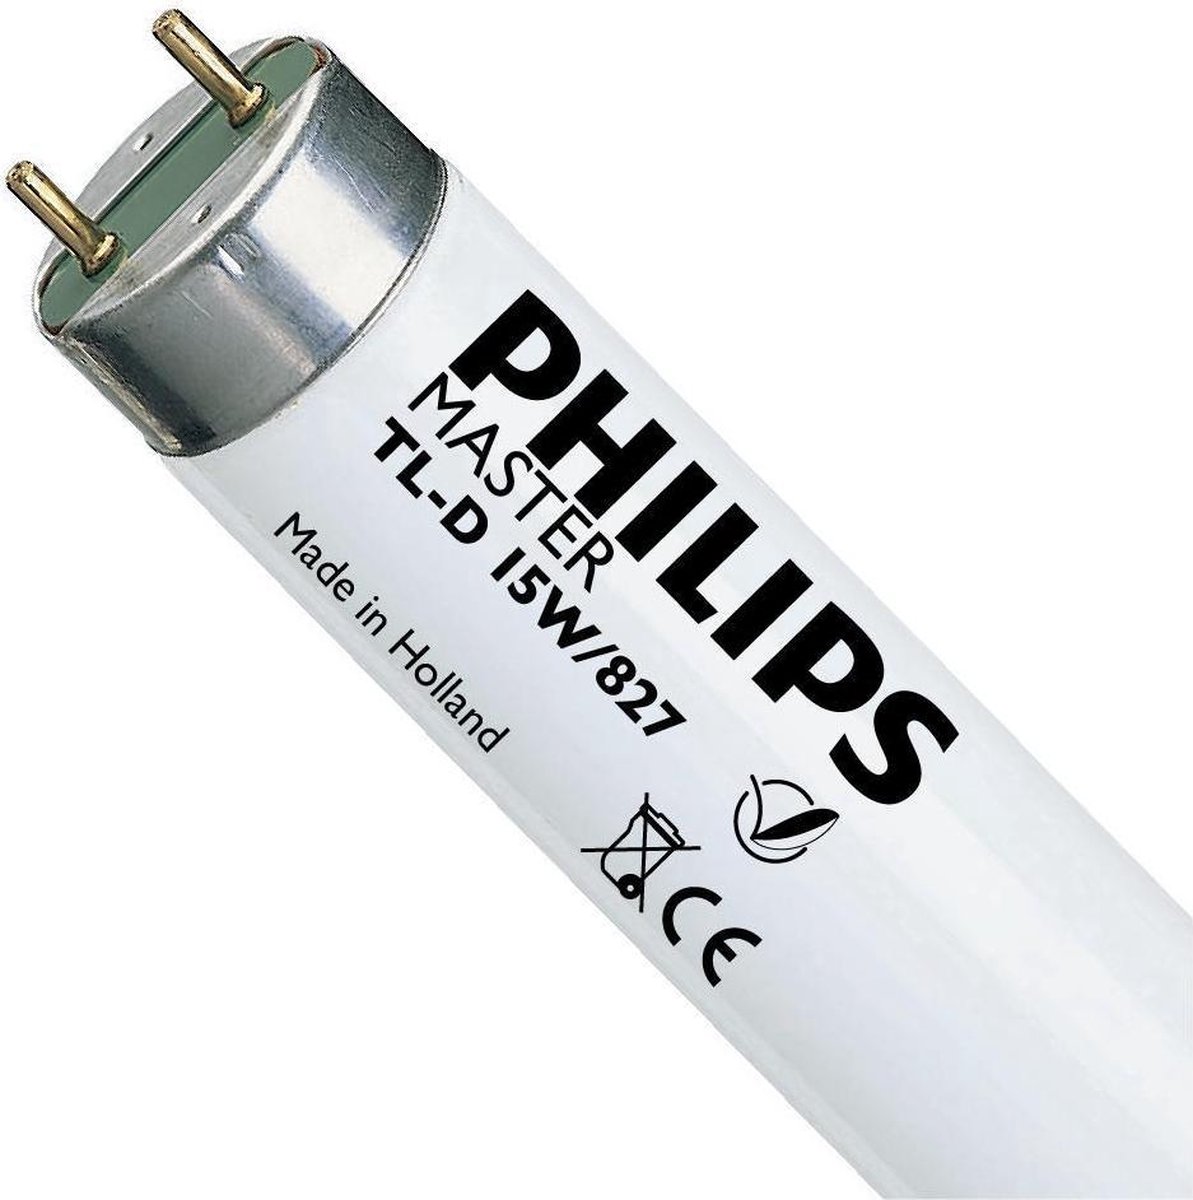 Philips TLD 15W/827